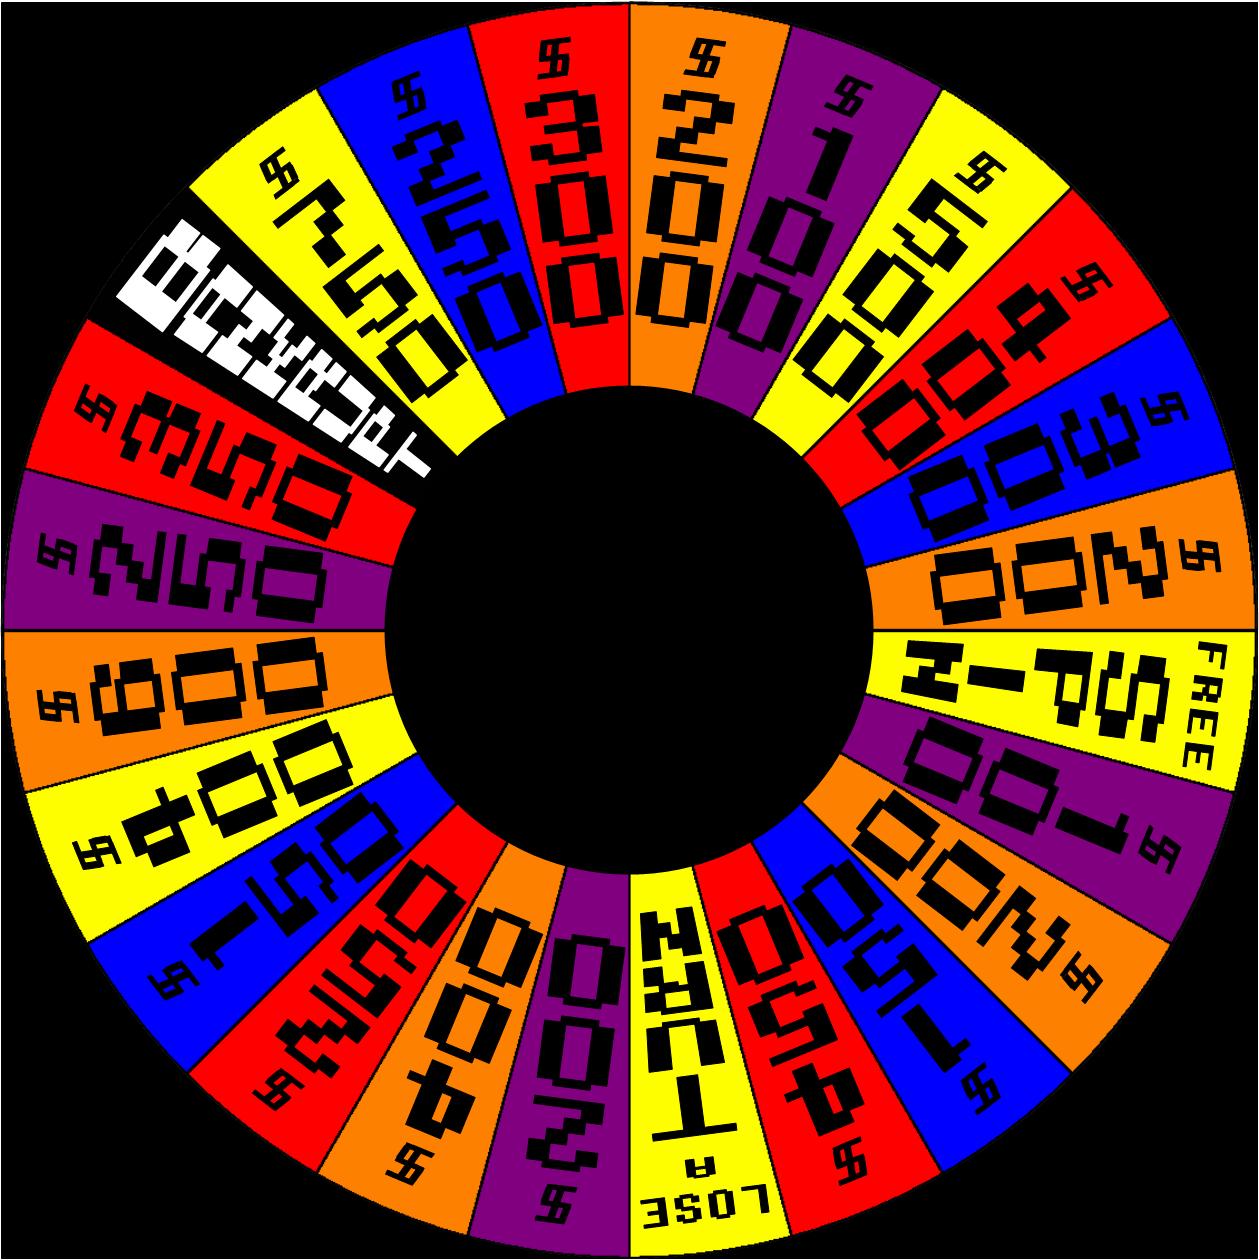 VGAWheel Layout 1 by germanname